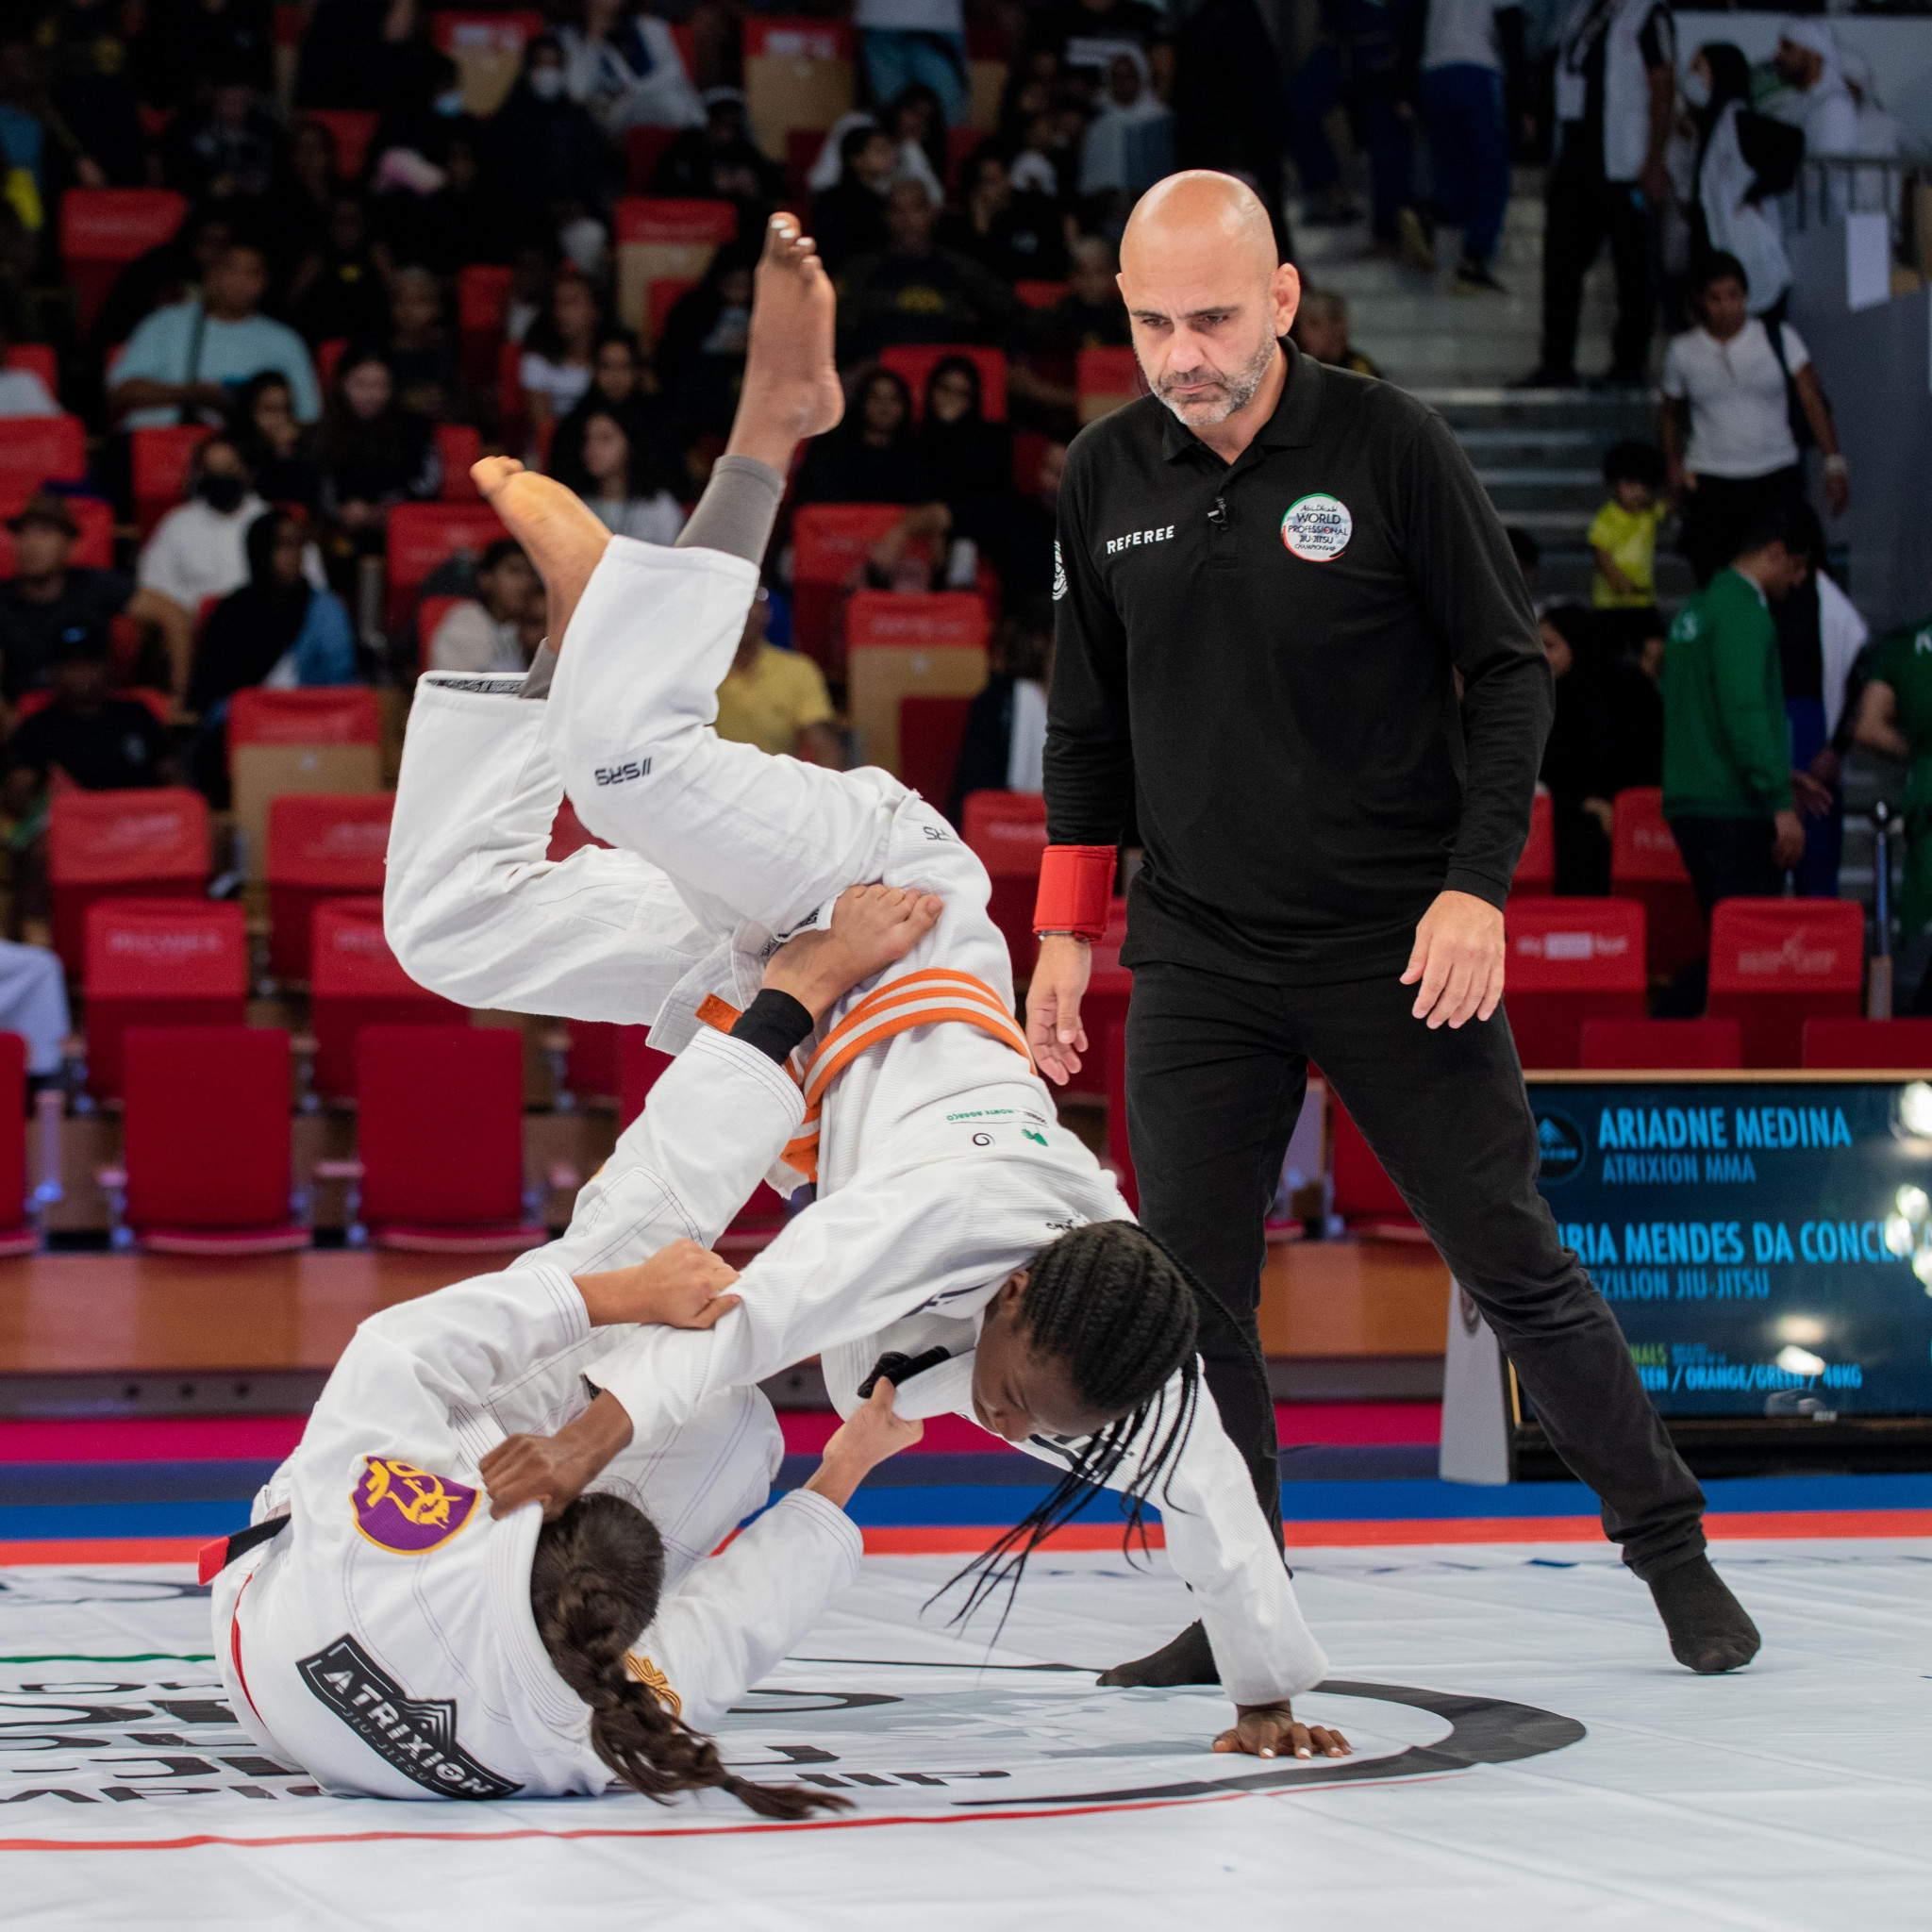 The 15th edition of the event is scheduled to run from November 1 to 10 in the Mubadala Arena in the capital city of the United Arab Emirates ©Abu Dhabi World Professional Jiu-Jitsu Championship